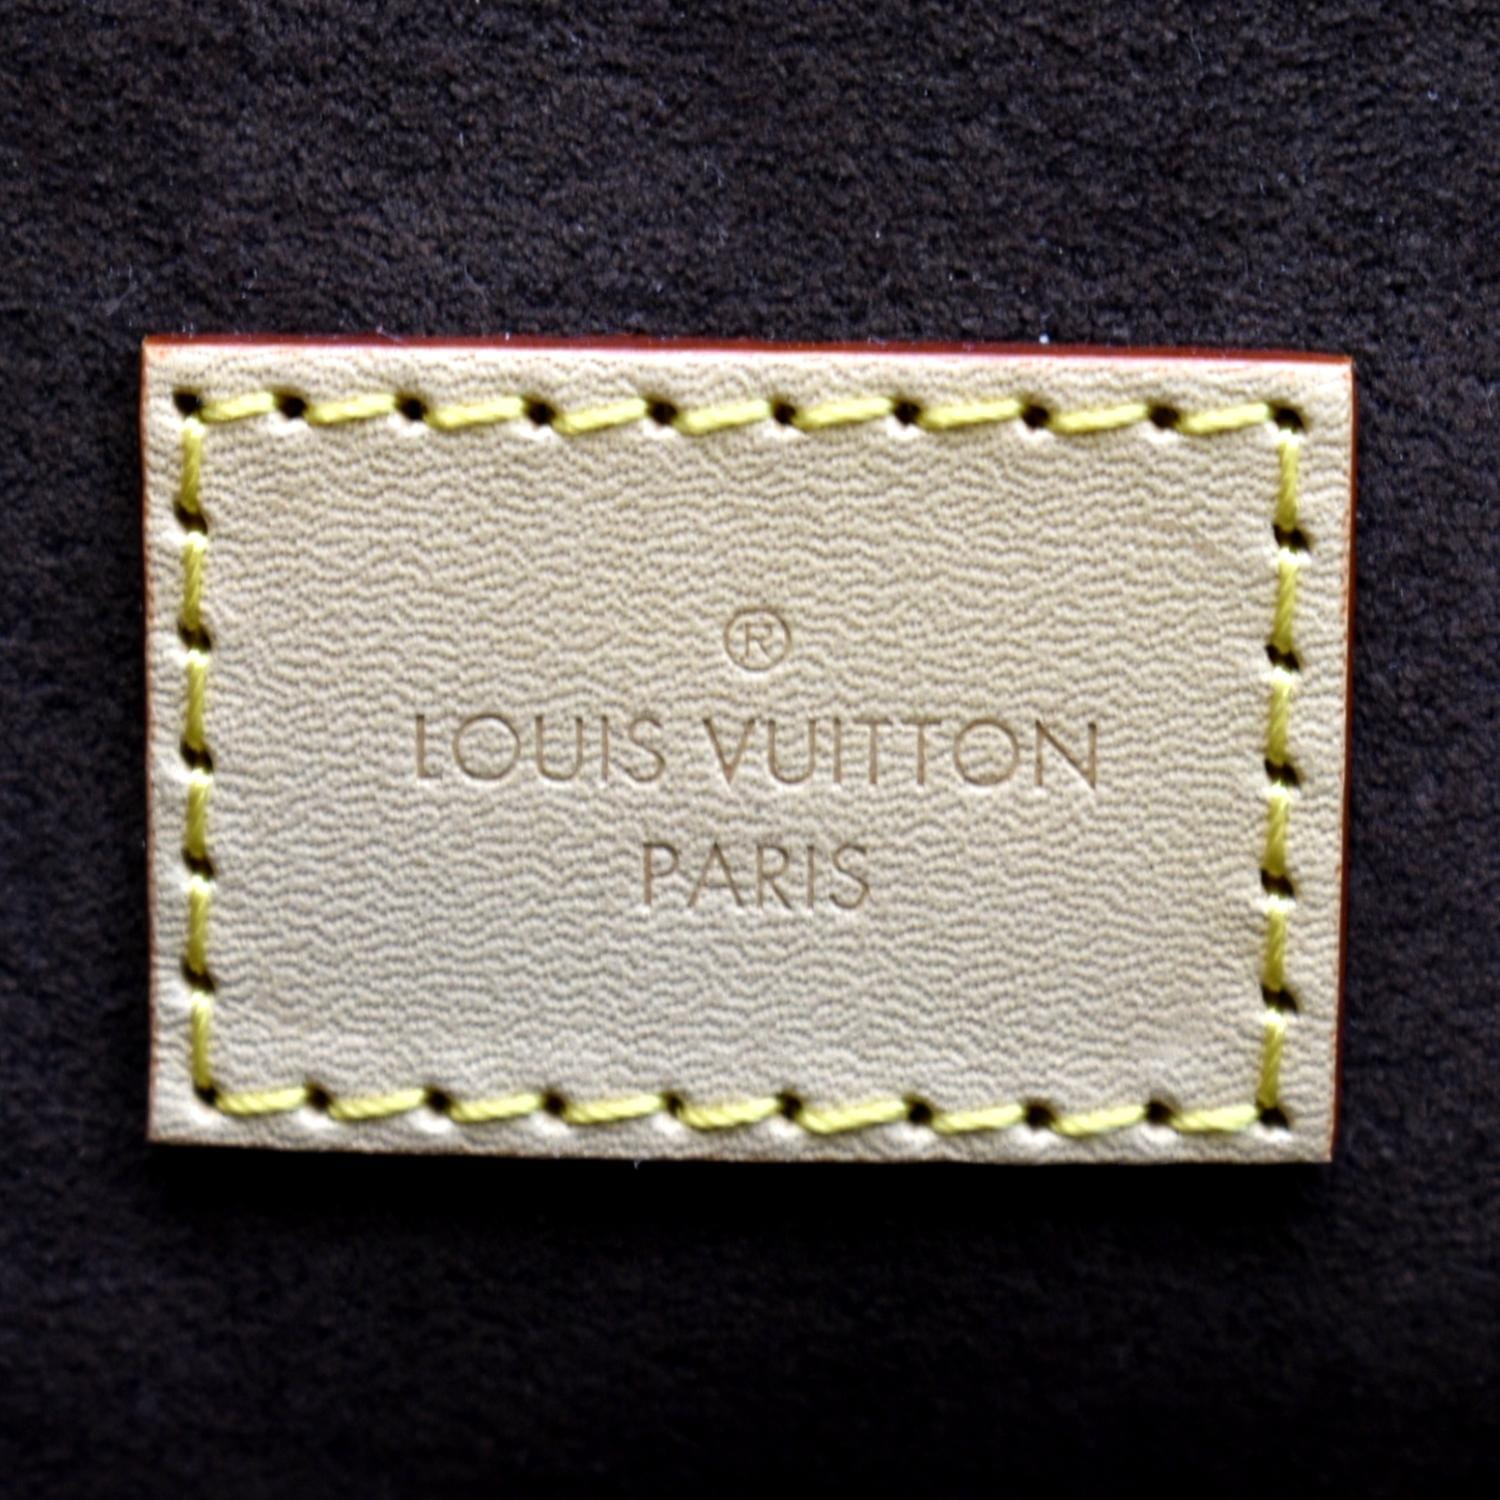 LOUIS VUITTON 2 Clothing Designer Tag LABEL Replacement Sewing